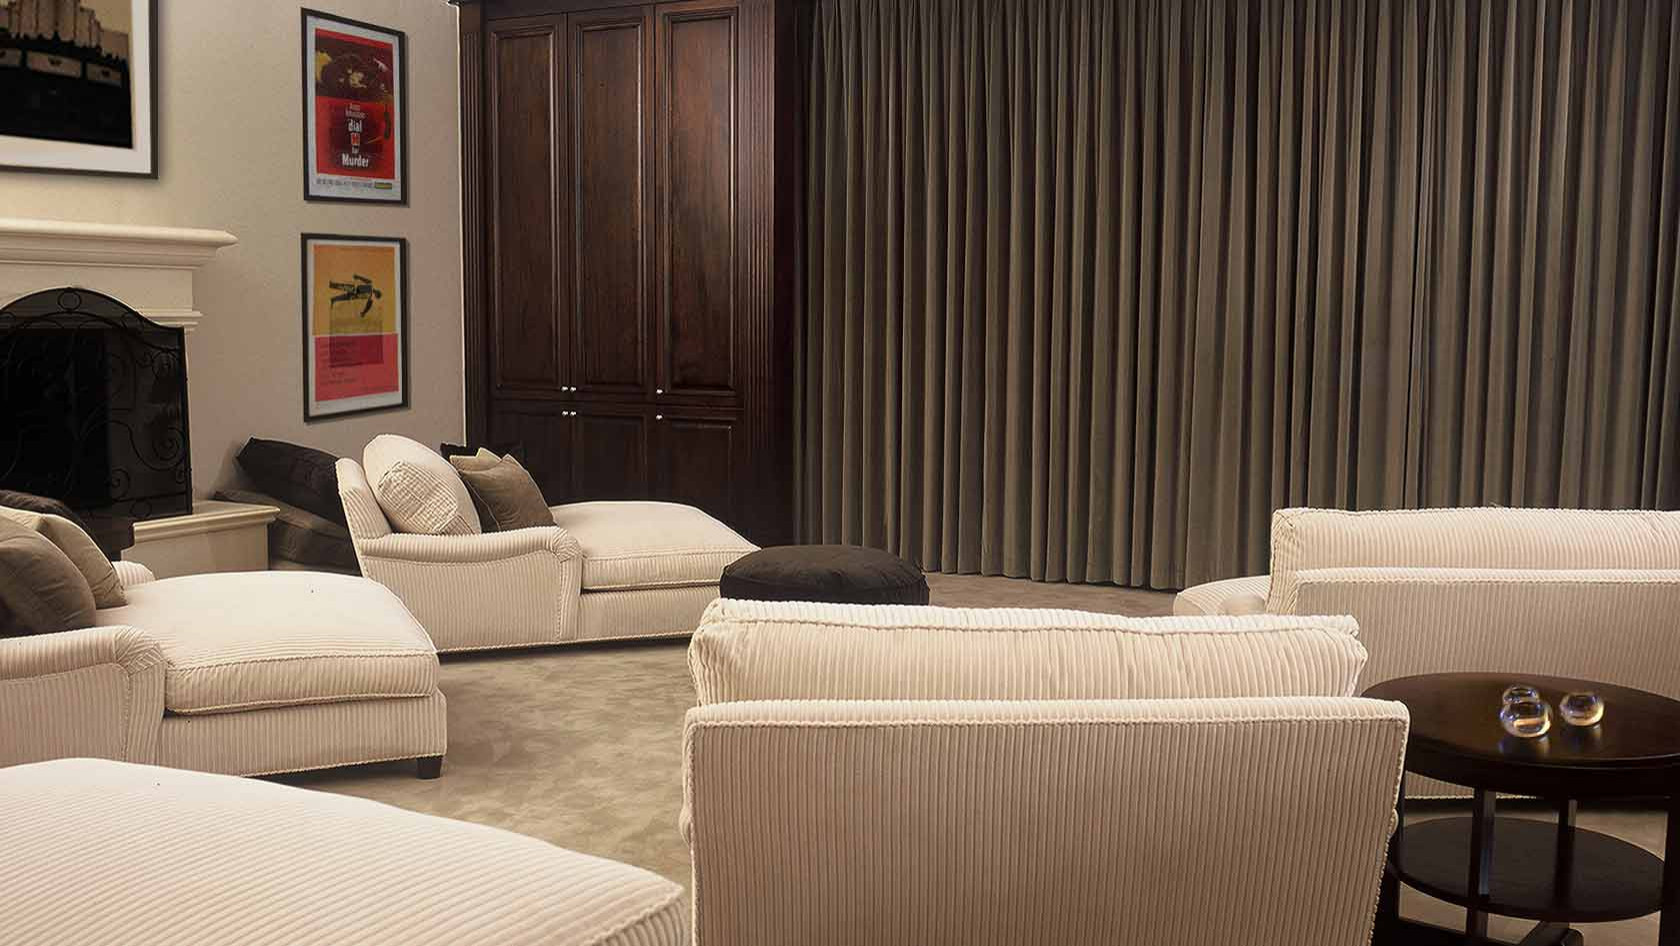 Chelsea Double Chaise Lounge - Home Theater - Los Angeles - by PLUSH HOME  by Nina Petronzio | Houzz